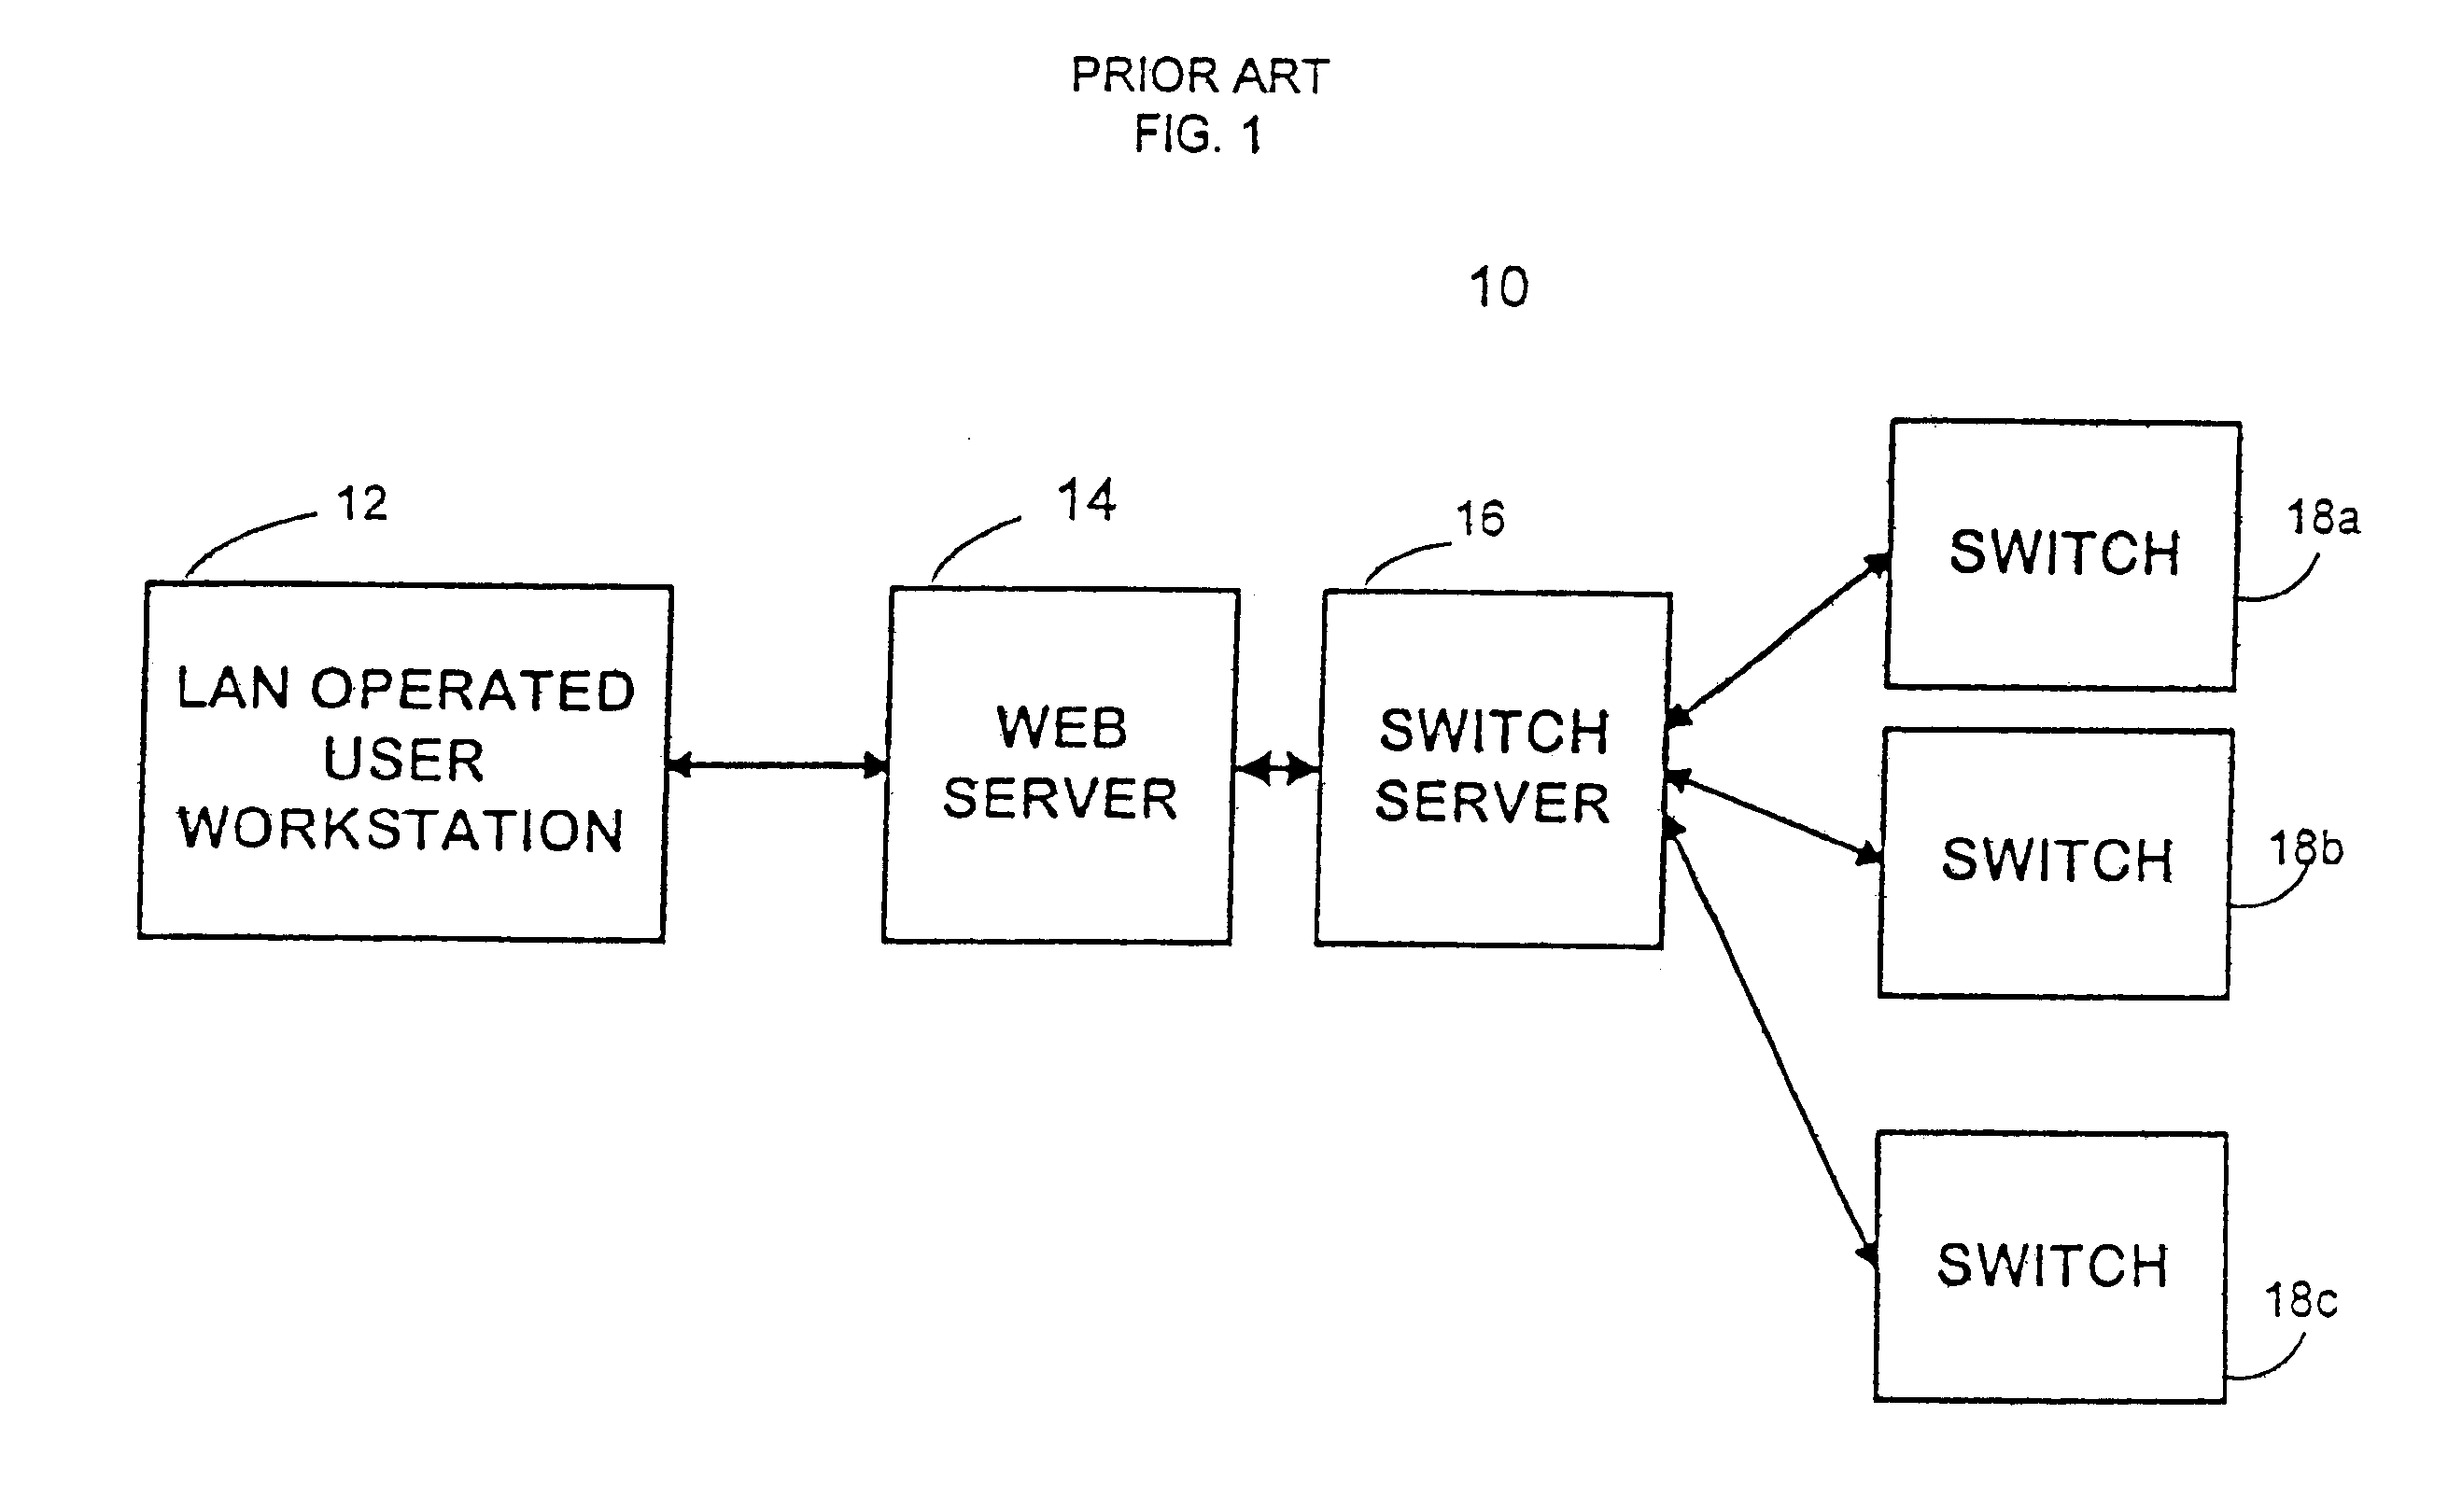 Switch interaction subsystems for facilitating network information management